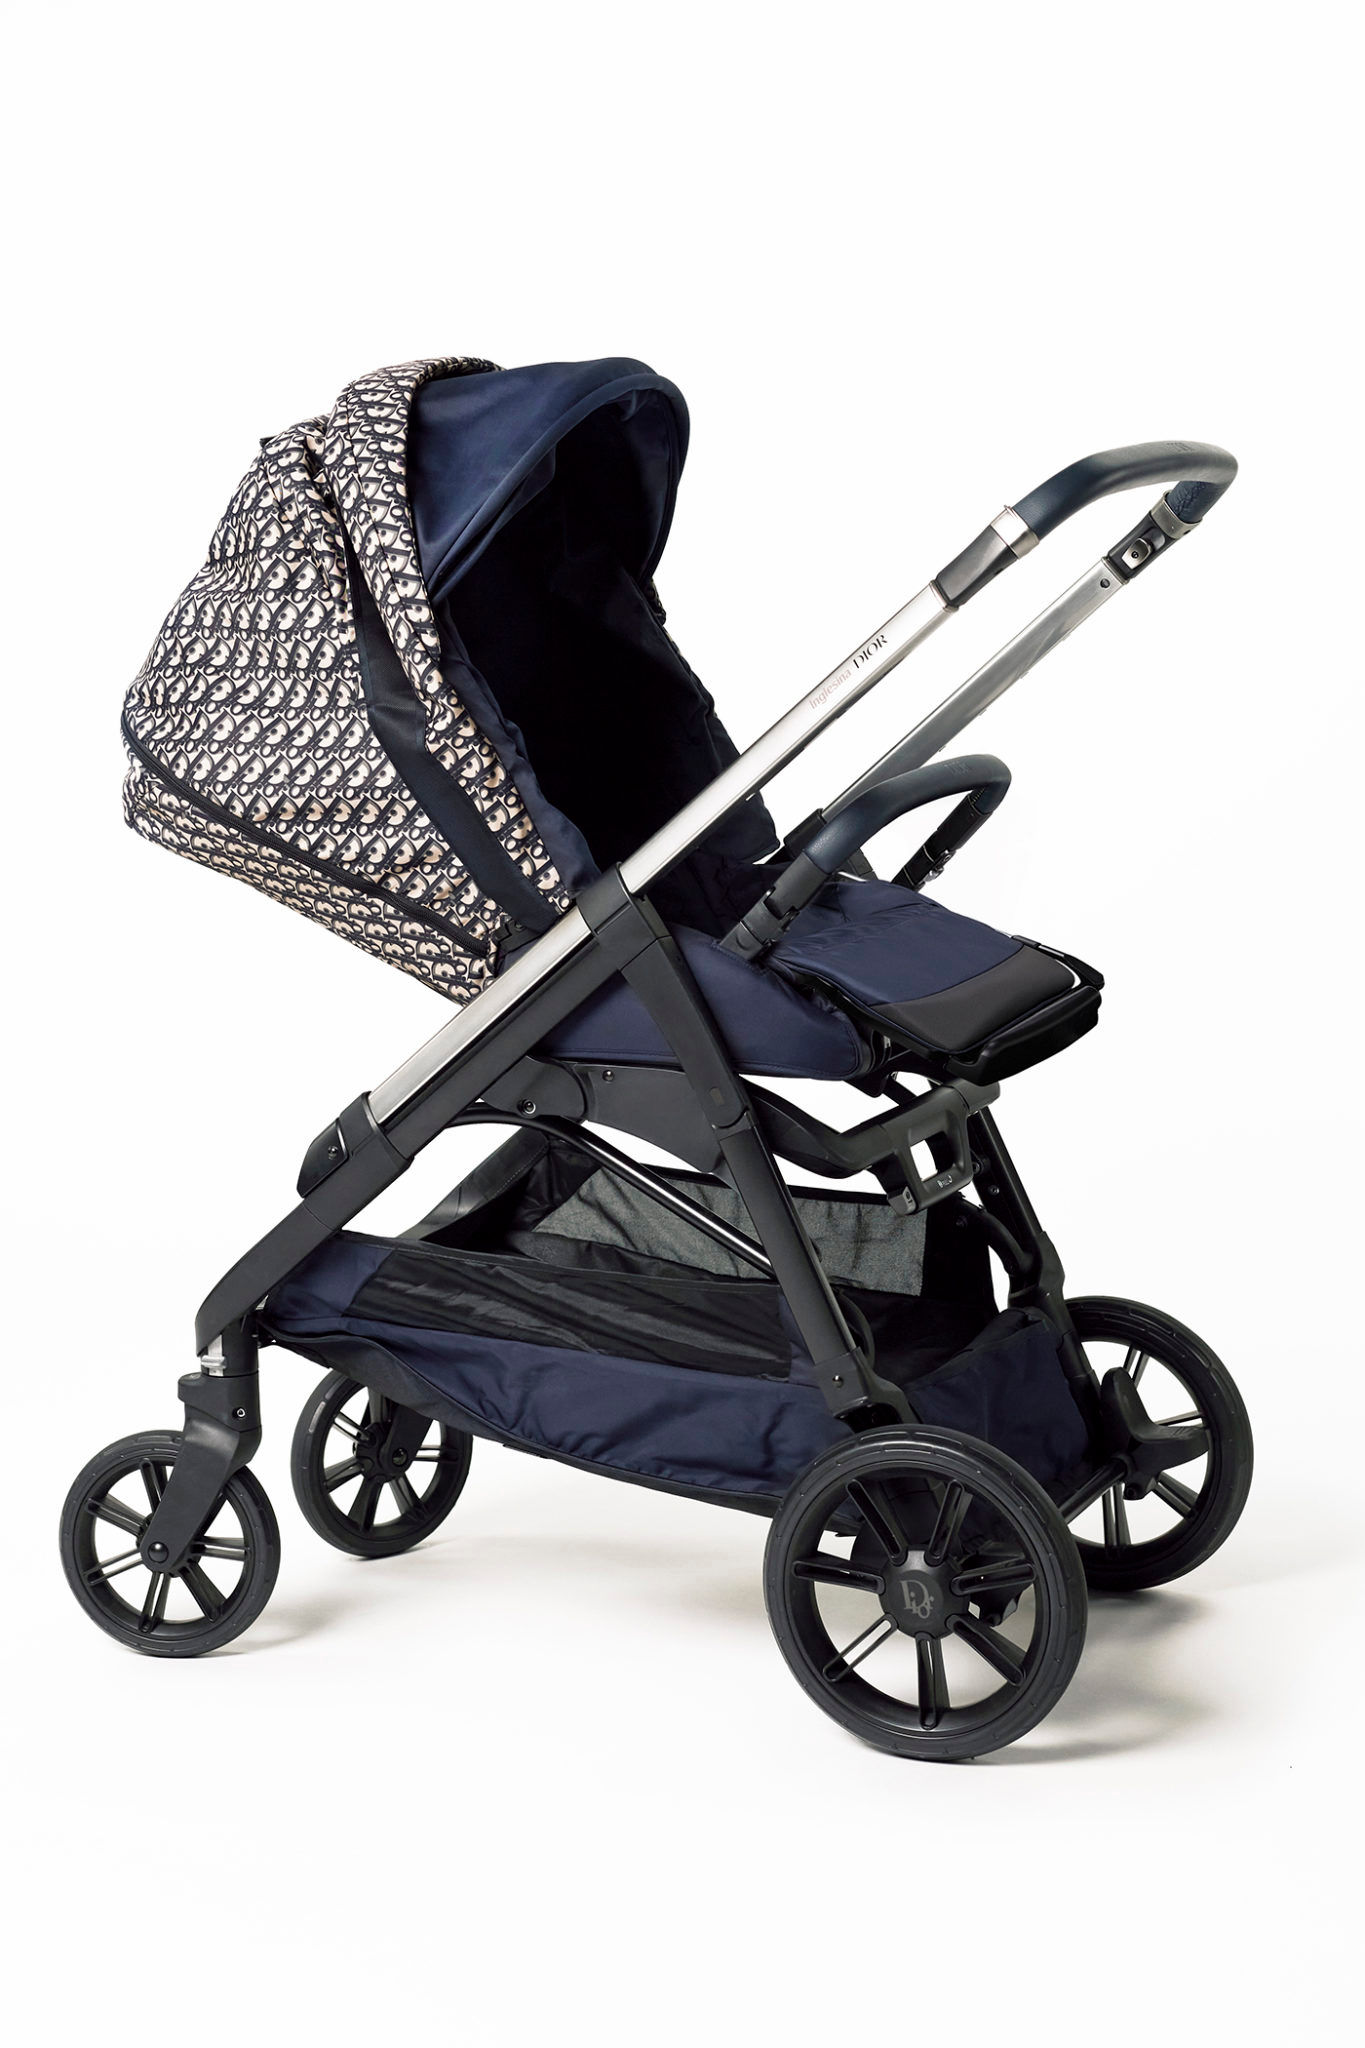 You Can Now Get a Dior Baby Stroller Thanks to This Collab with Inglesina